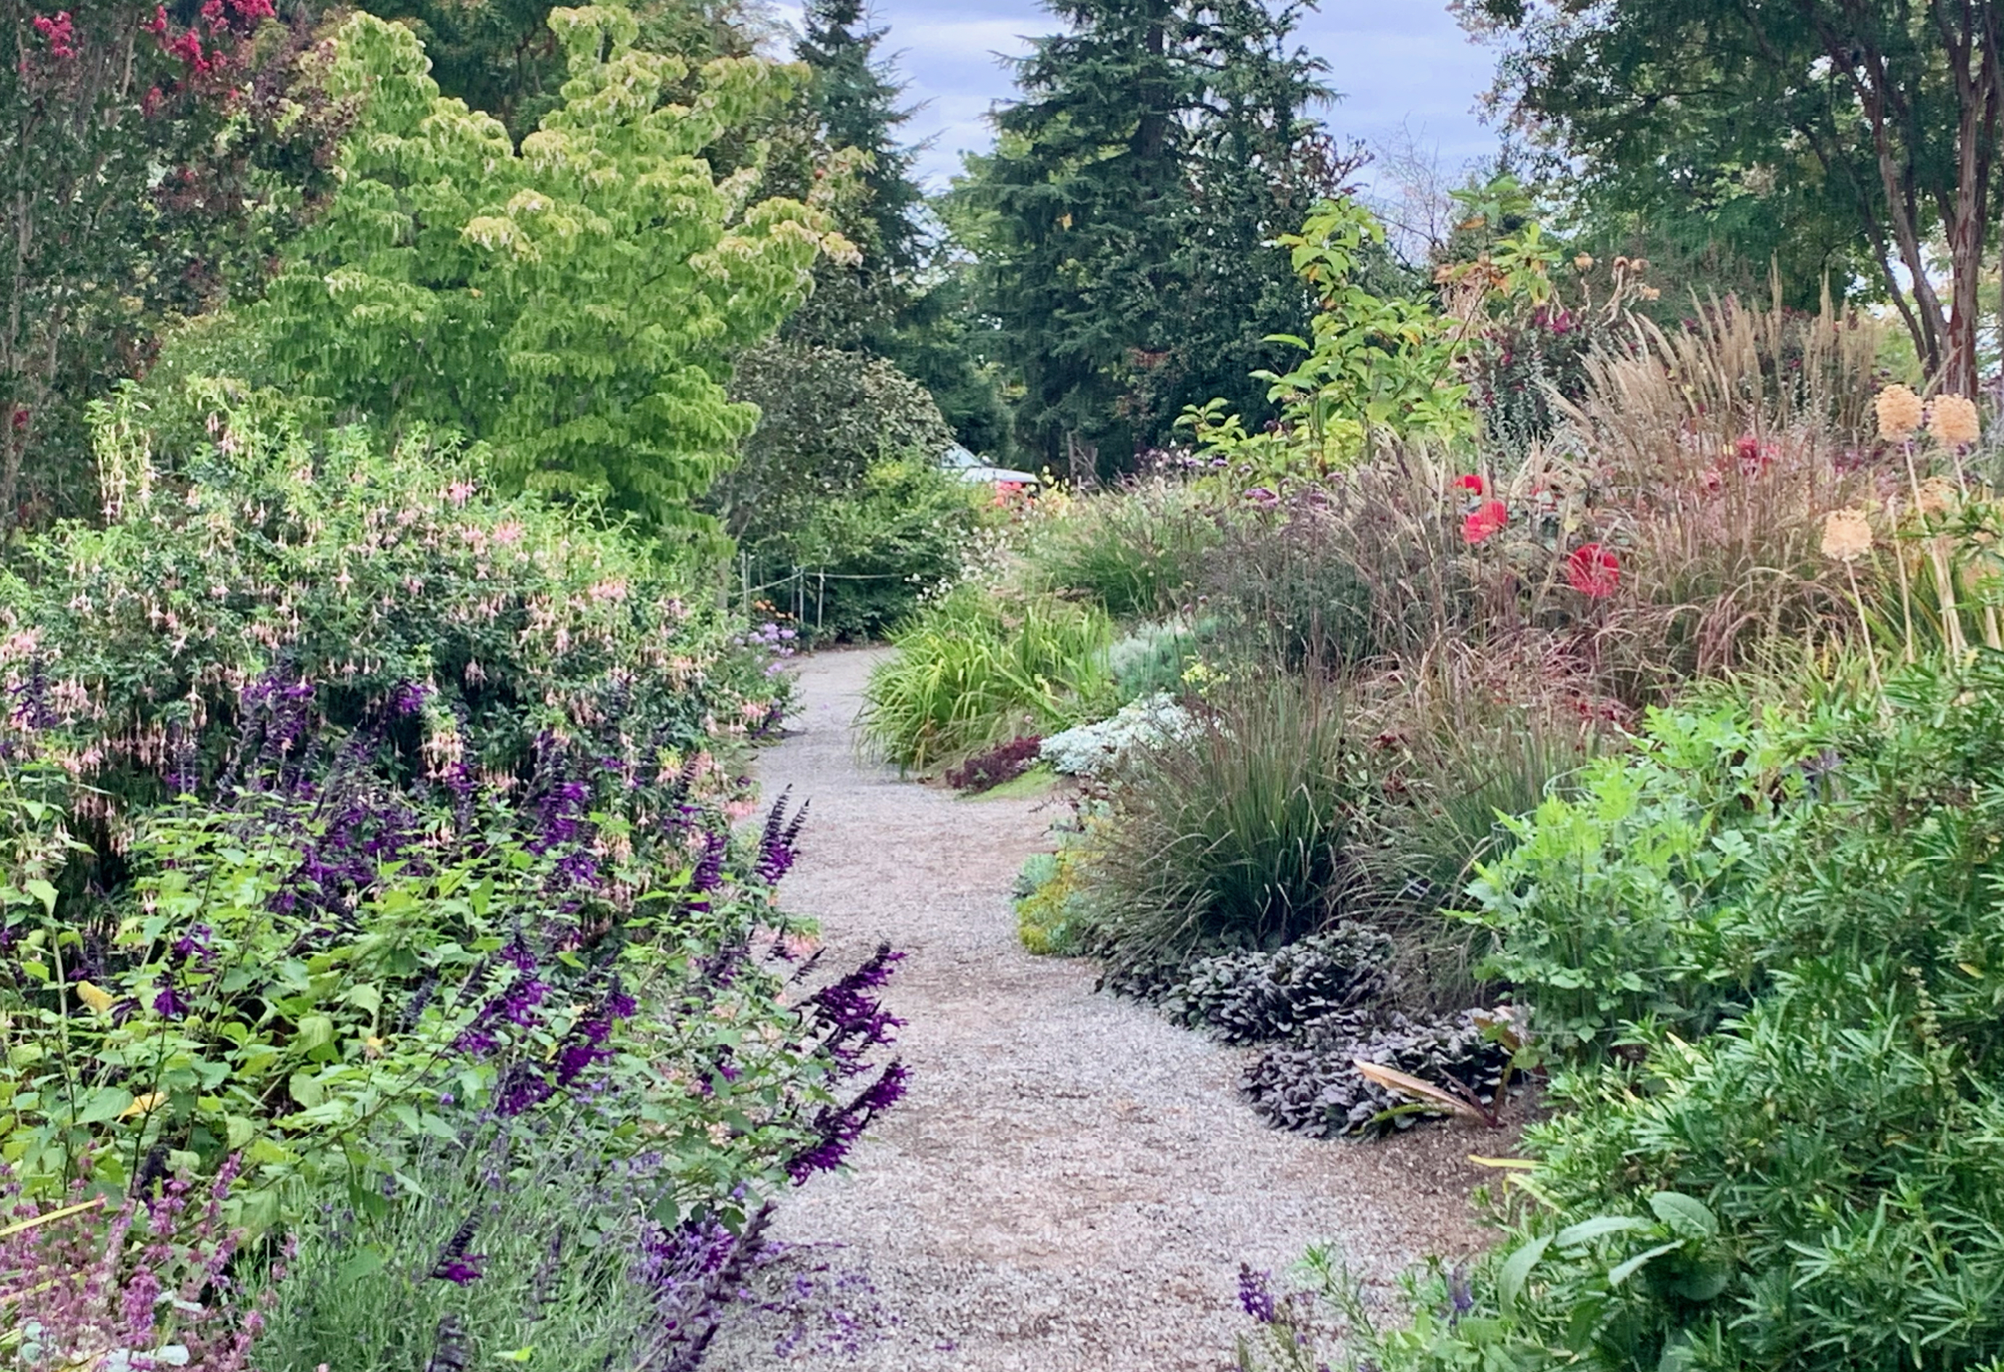 A garden path framed by green plants with flowers, some pink and some purple, with evergreen trees in the background.